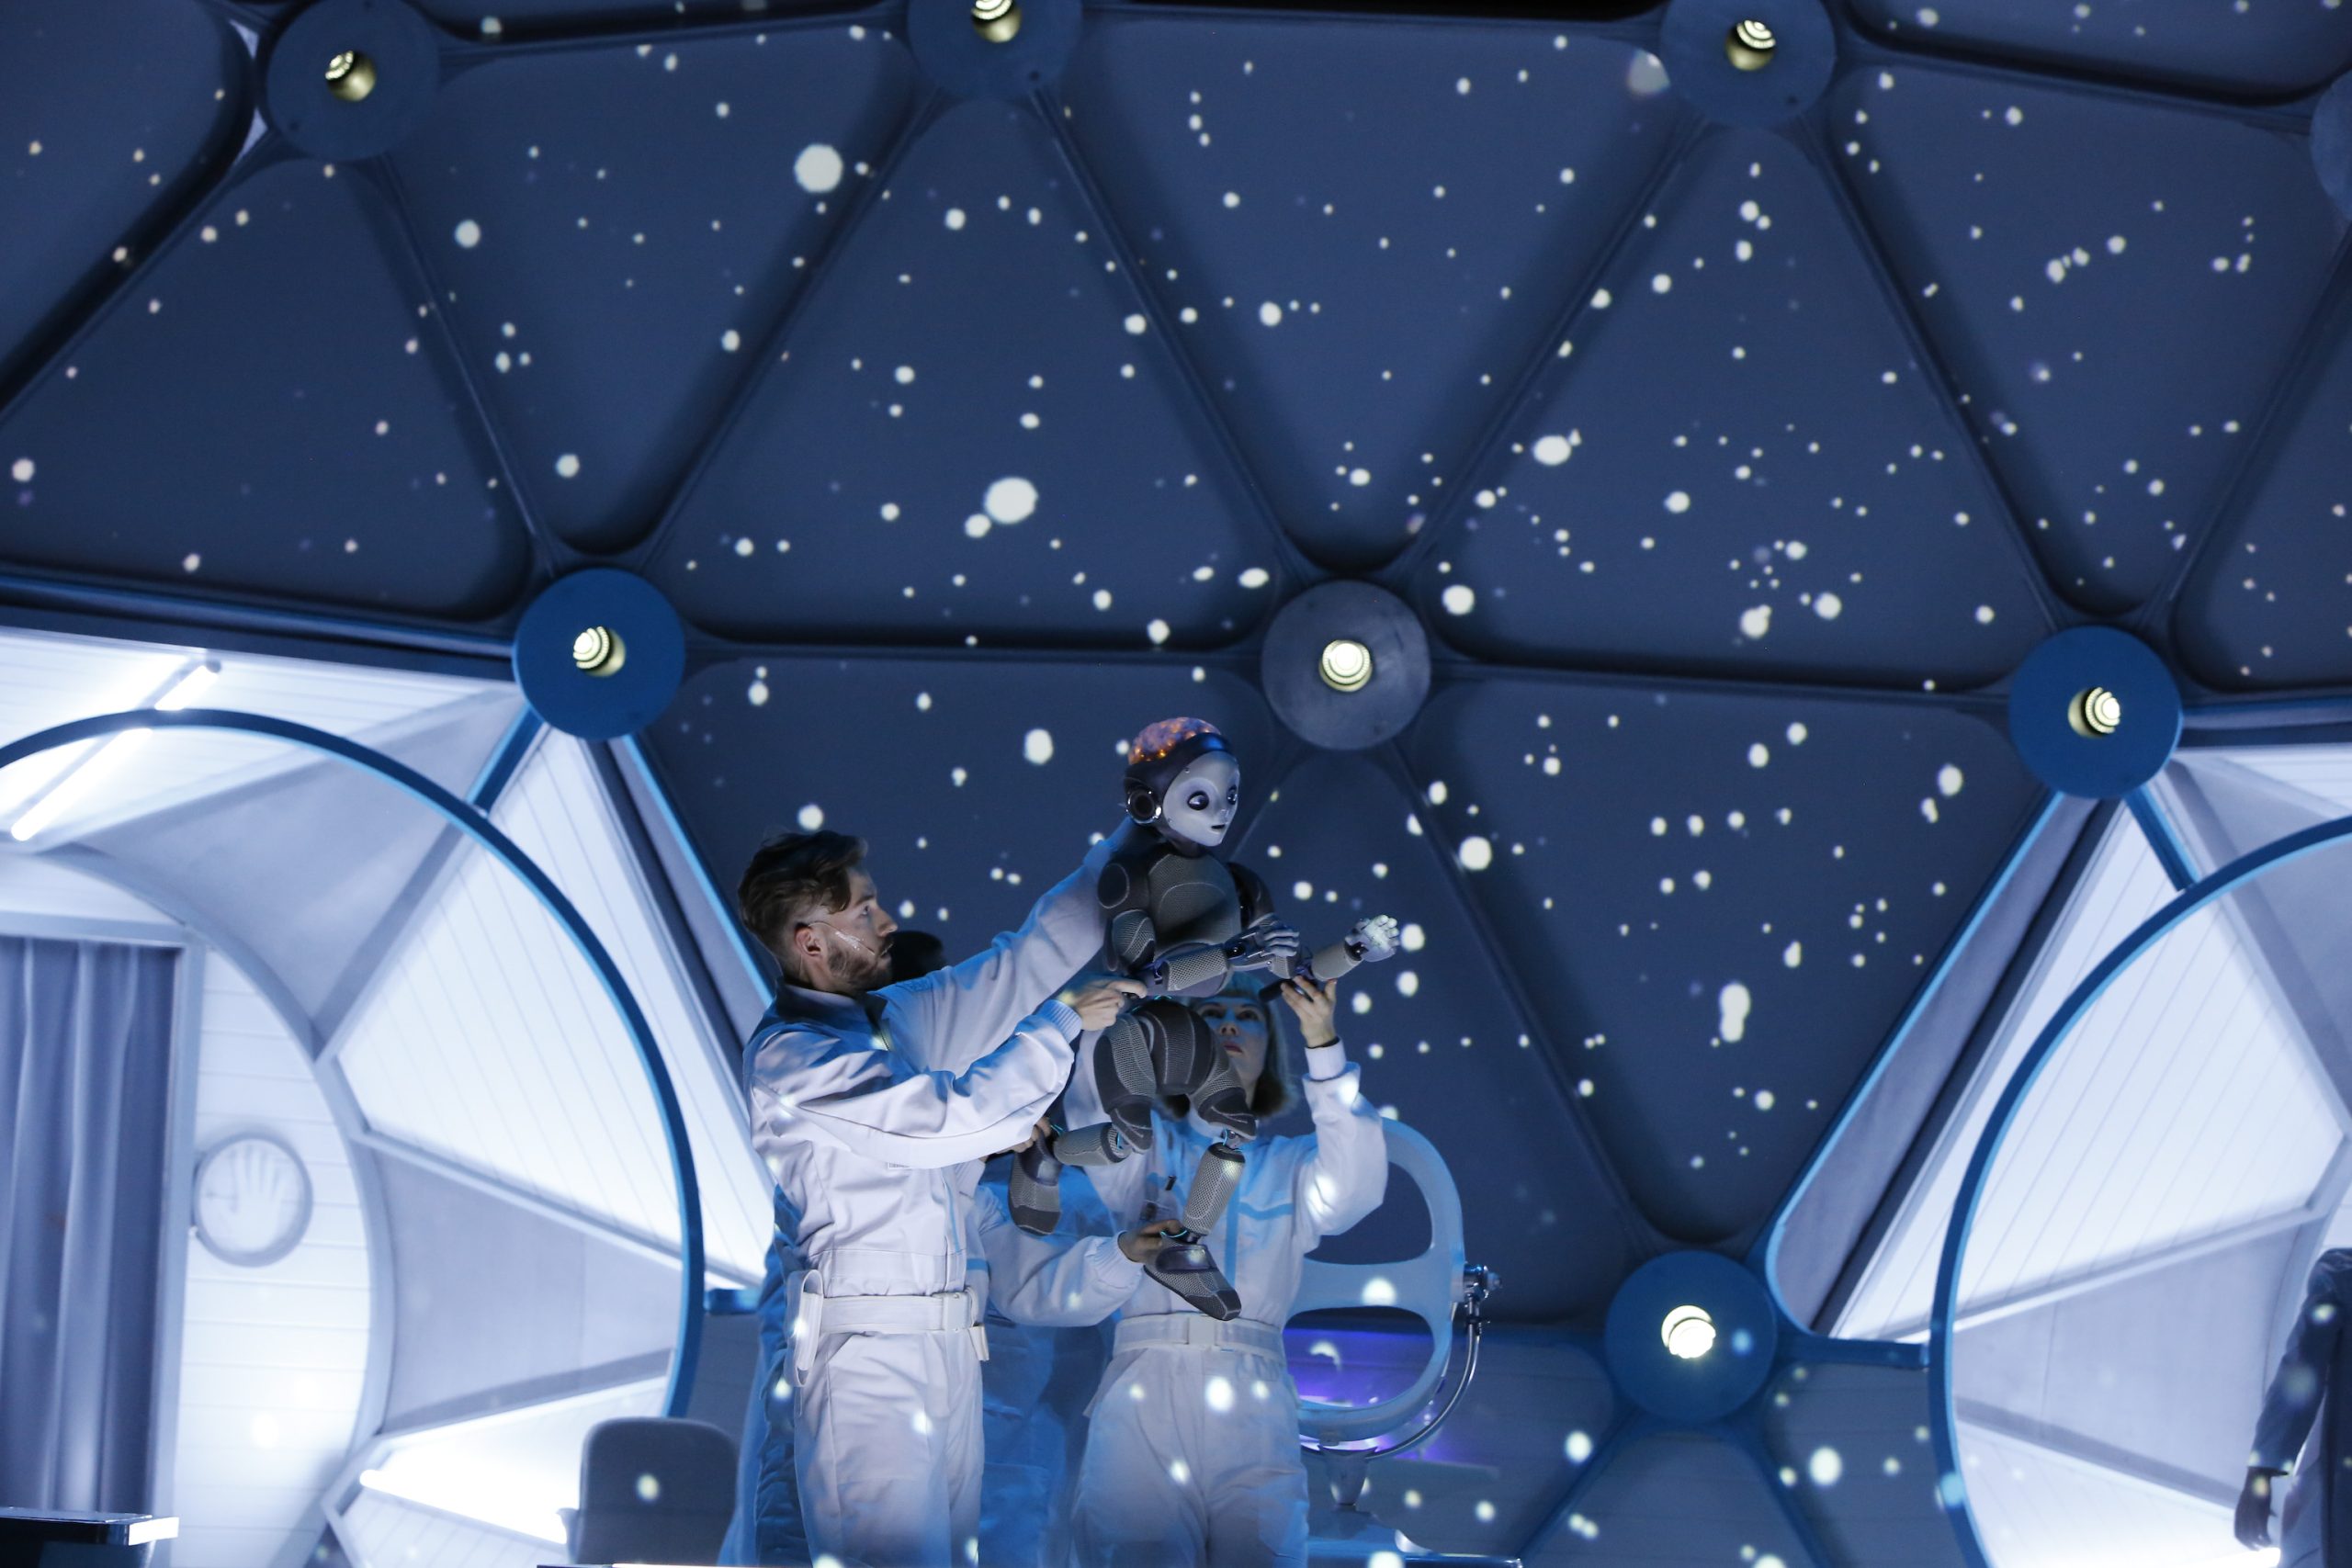 Two puppeteers manipulate a Robot Boy puppet across the stage at head height. The backdrop digital image gives the impression of stars in the sky.